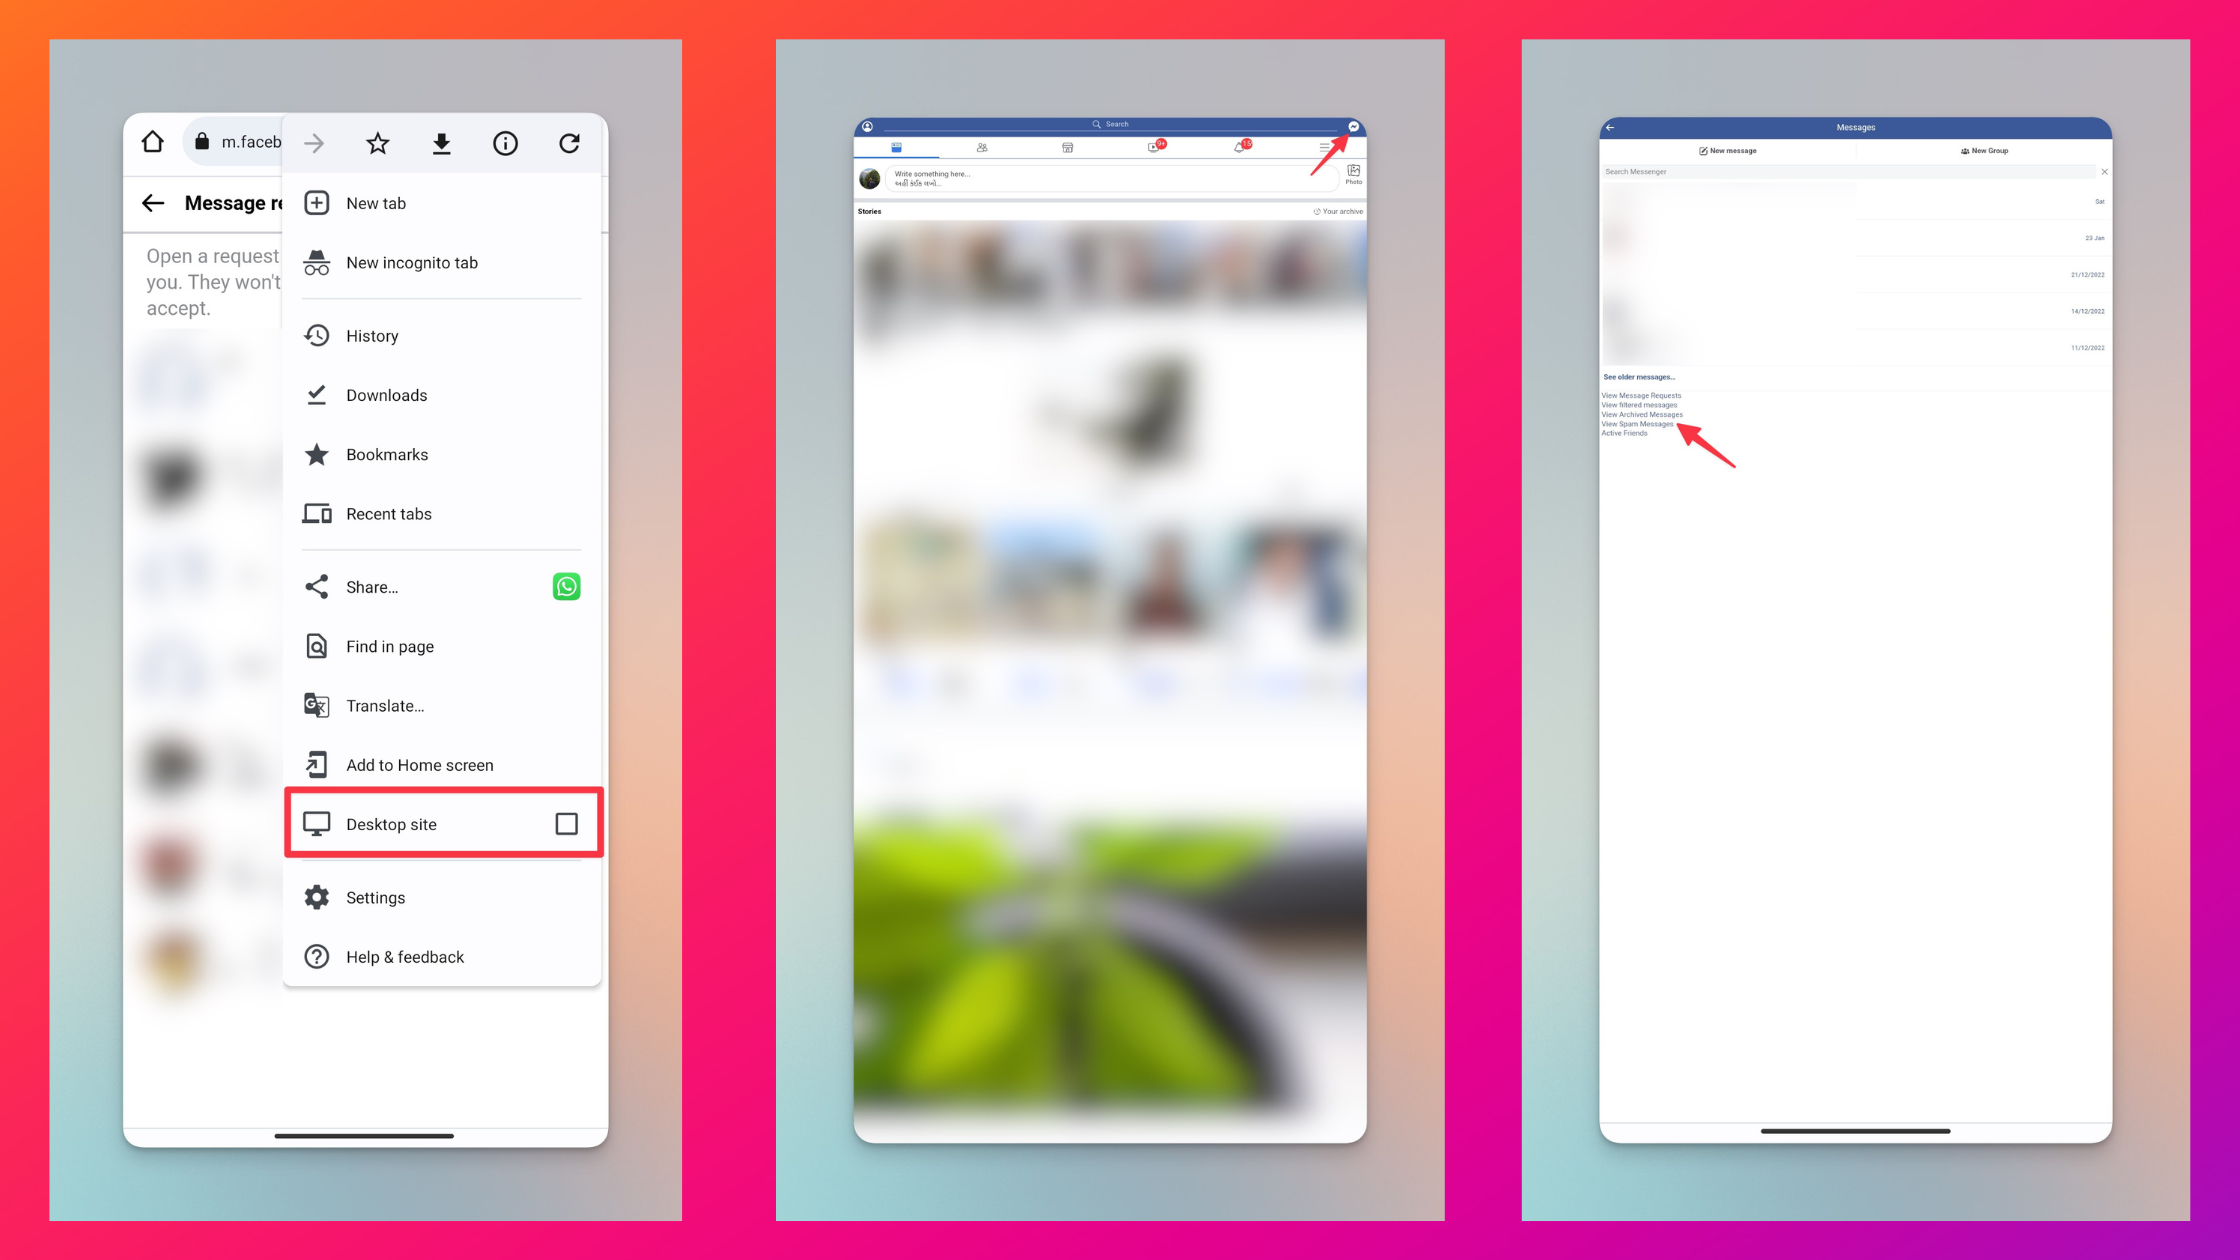 Remote.tools shows the desktop view of Facebook on mobile browser